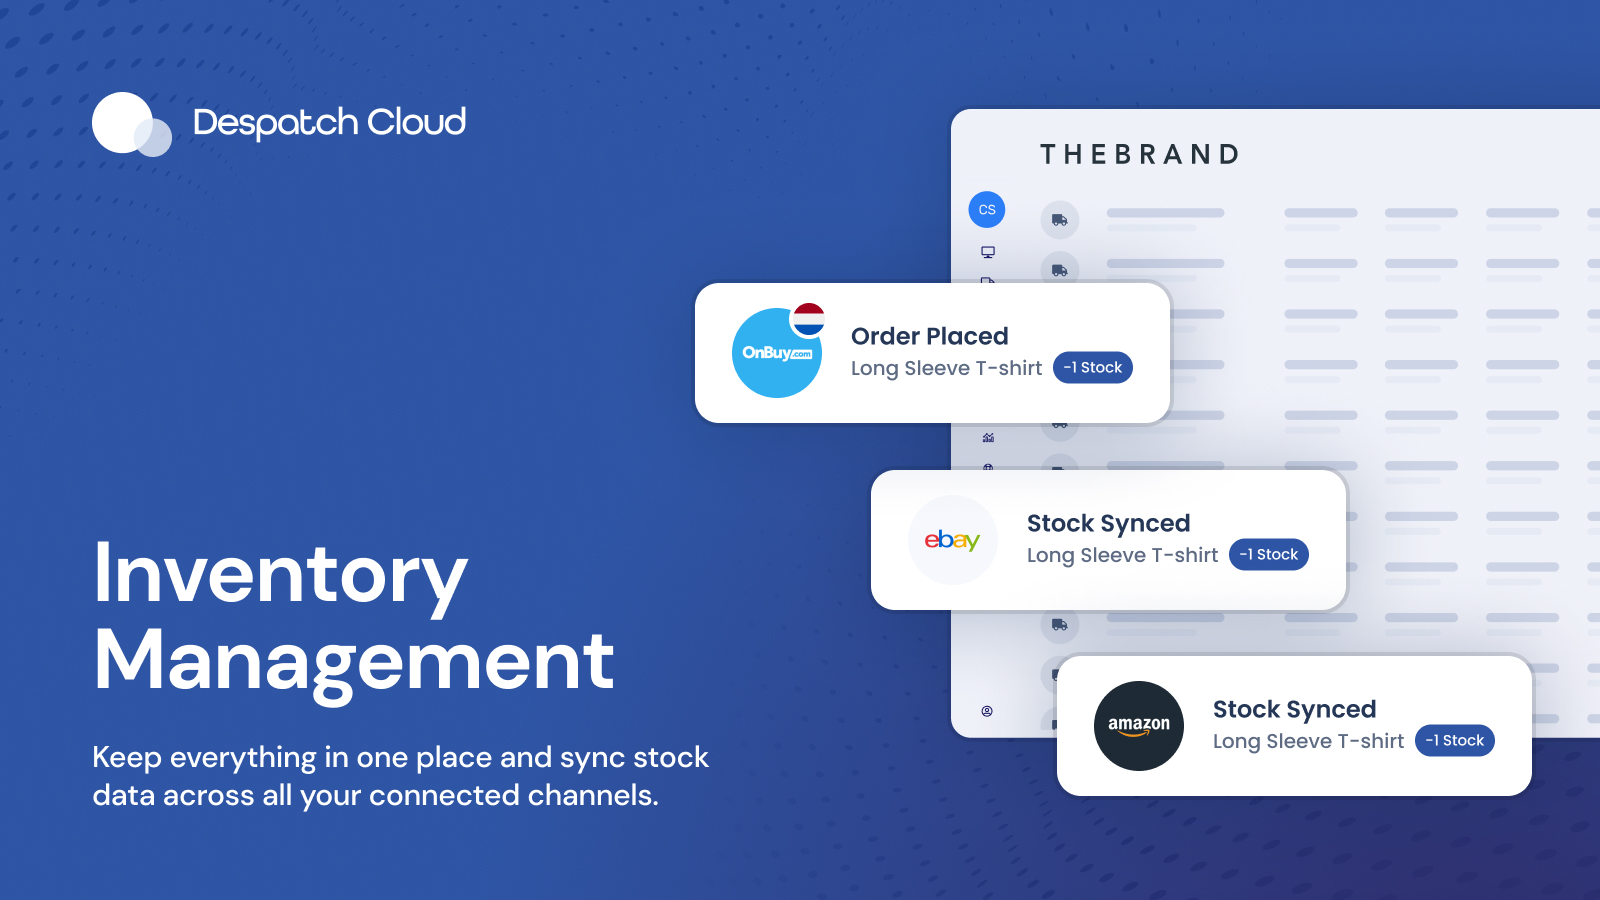 Keep everything in one place and sync stock data across all your connected channels. 